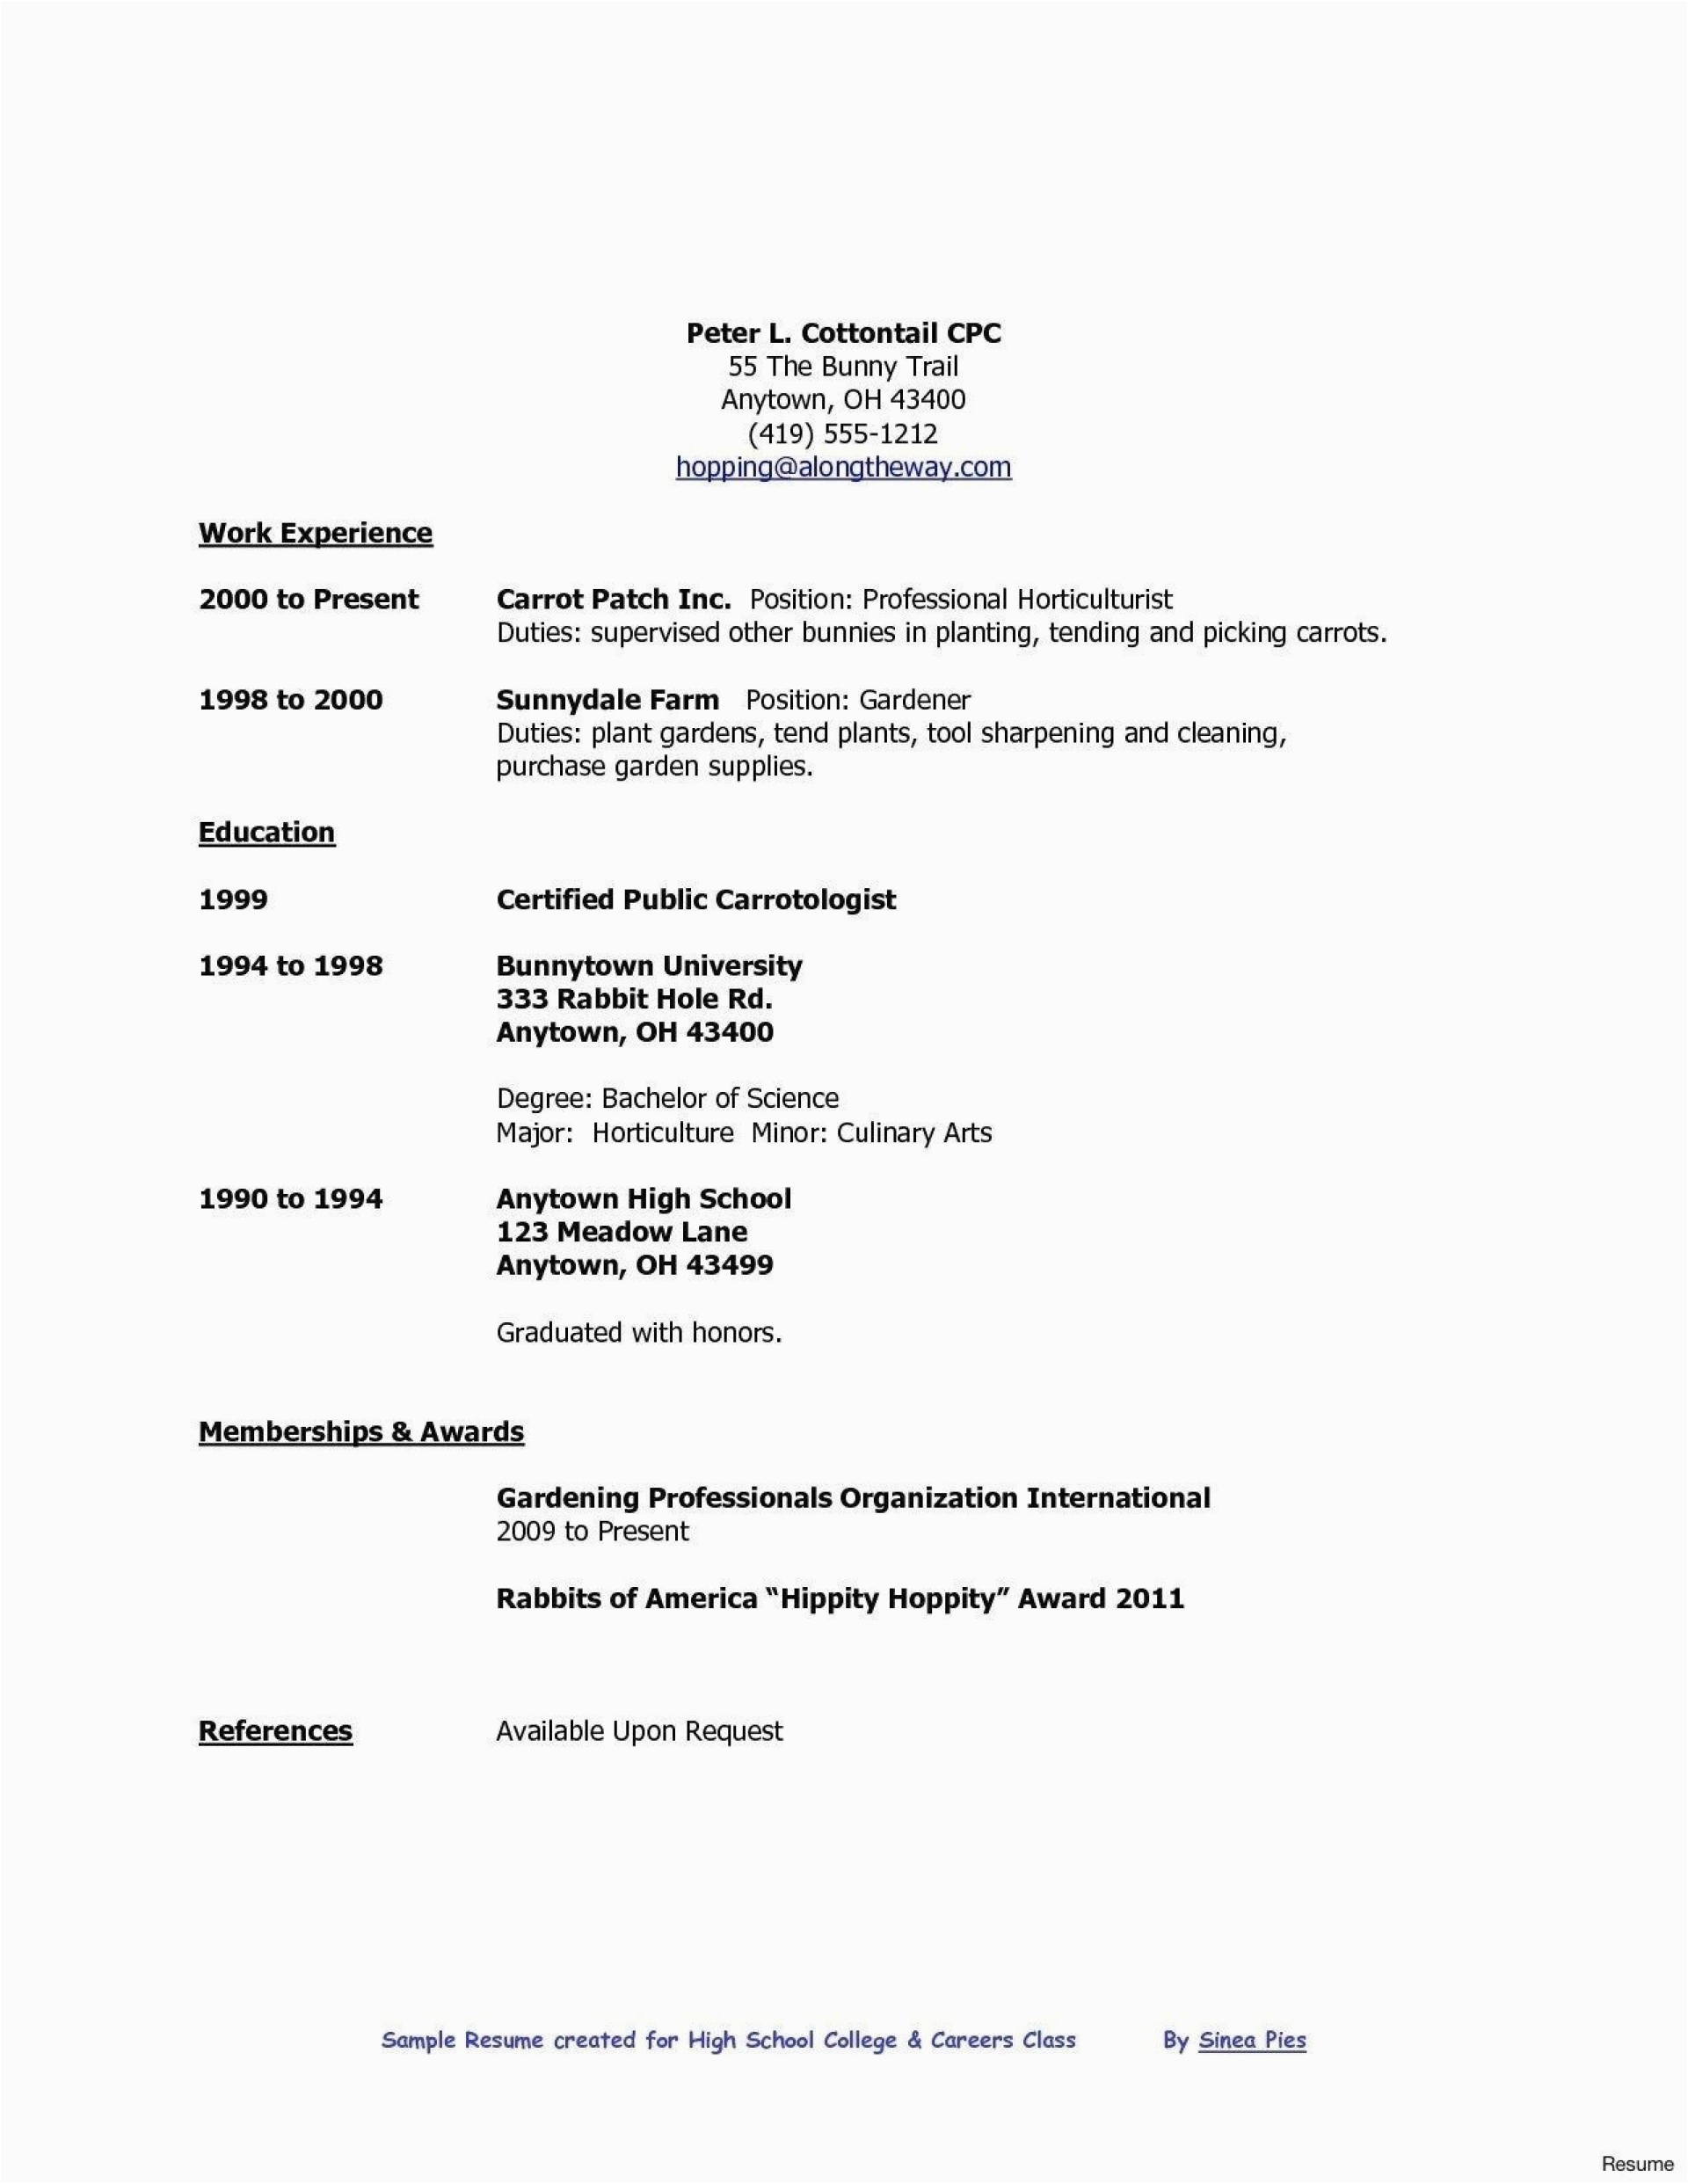 Sample Resume No Experience High School Grade 10 Teenager High School Student Resume with No Work